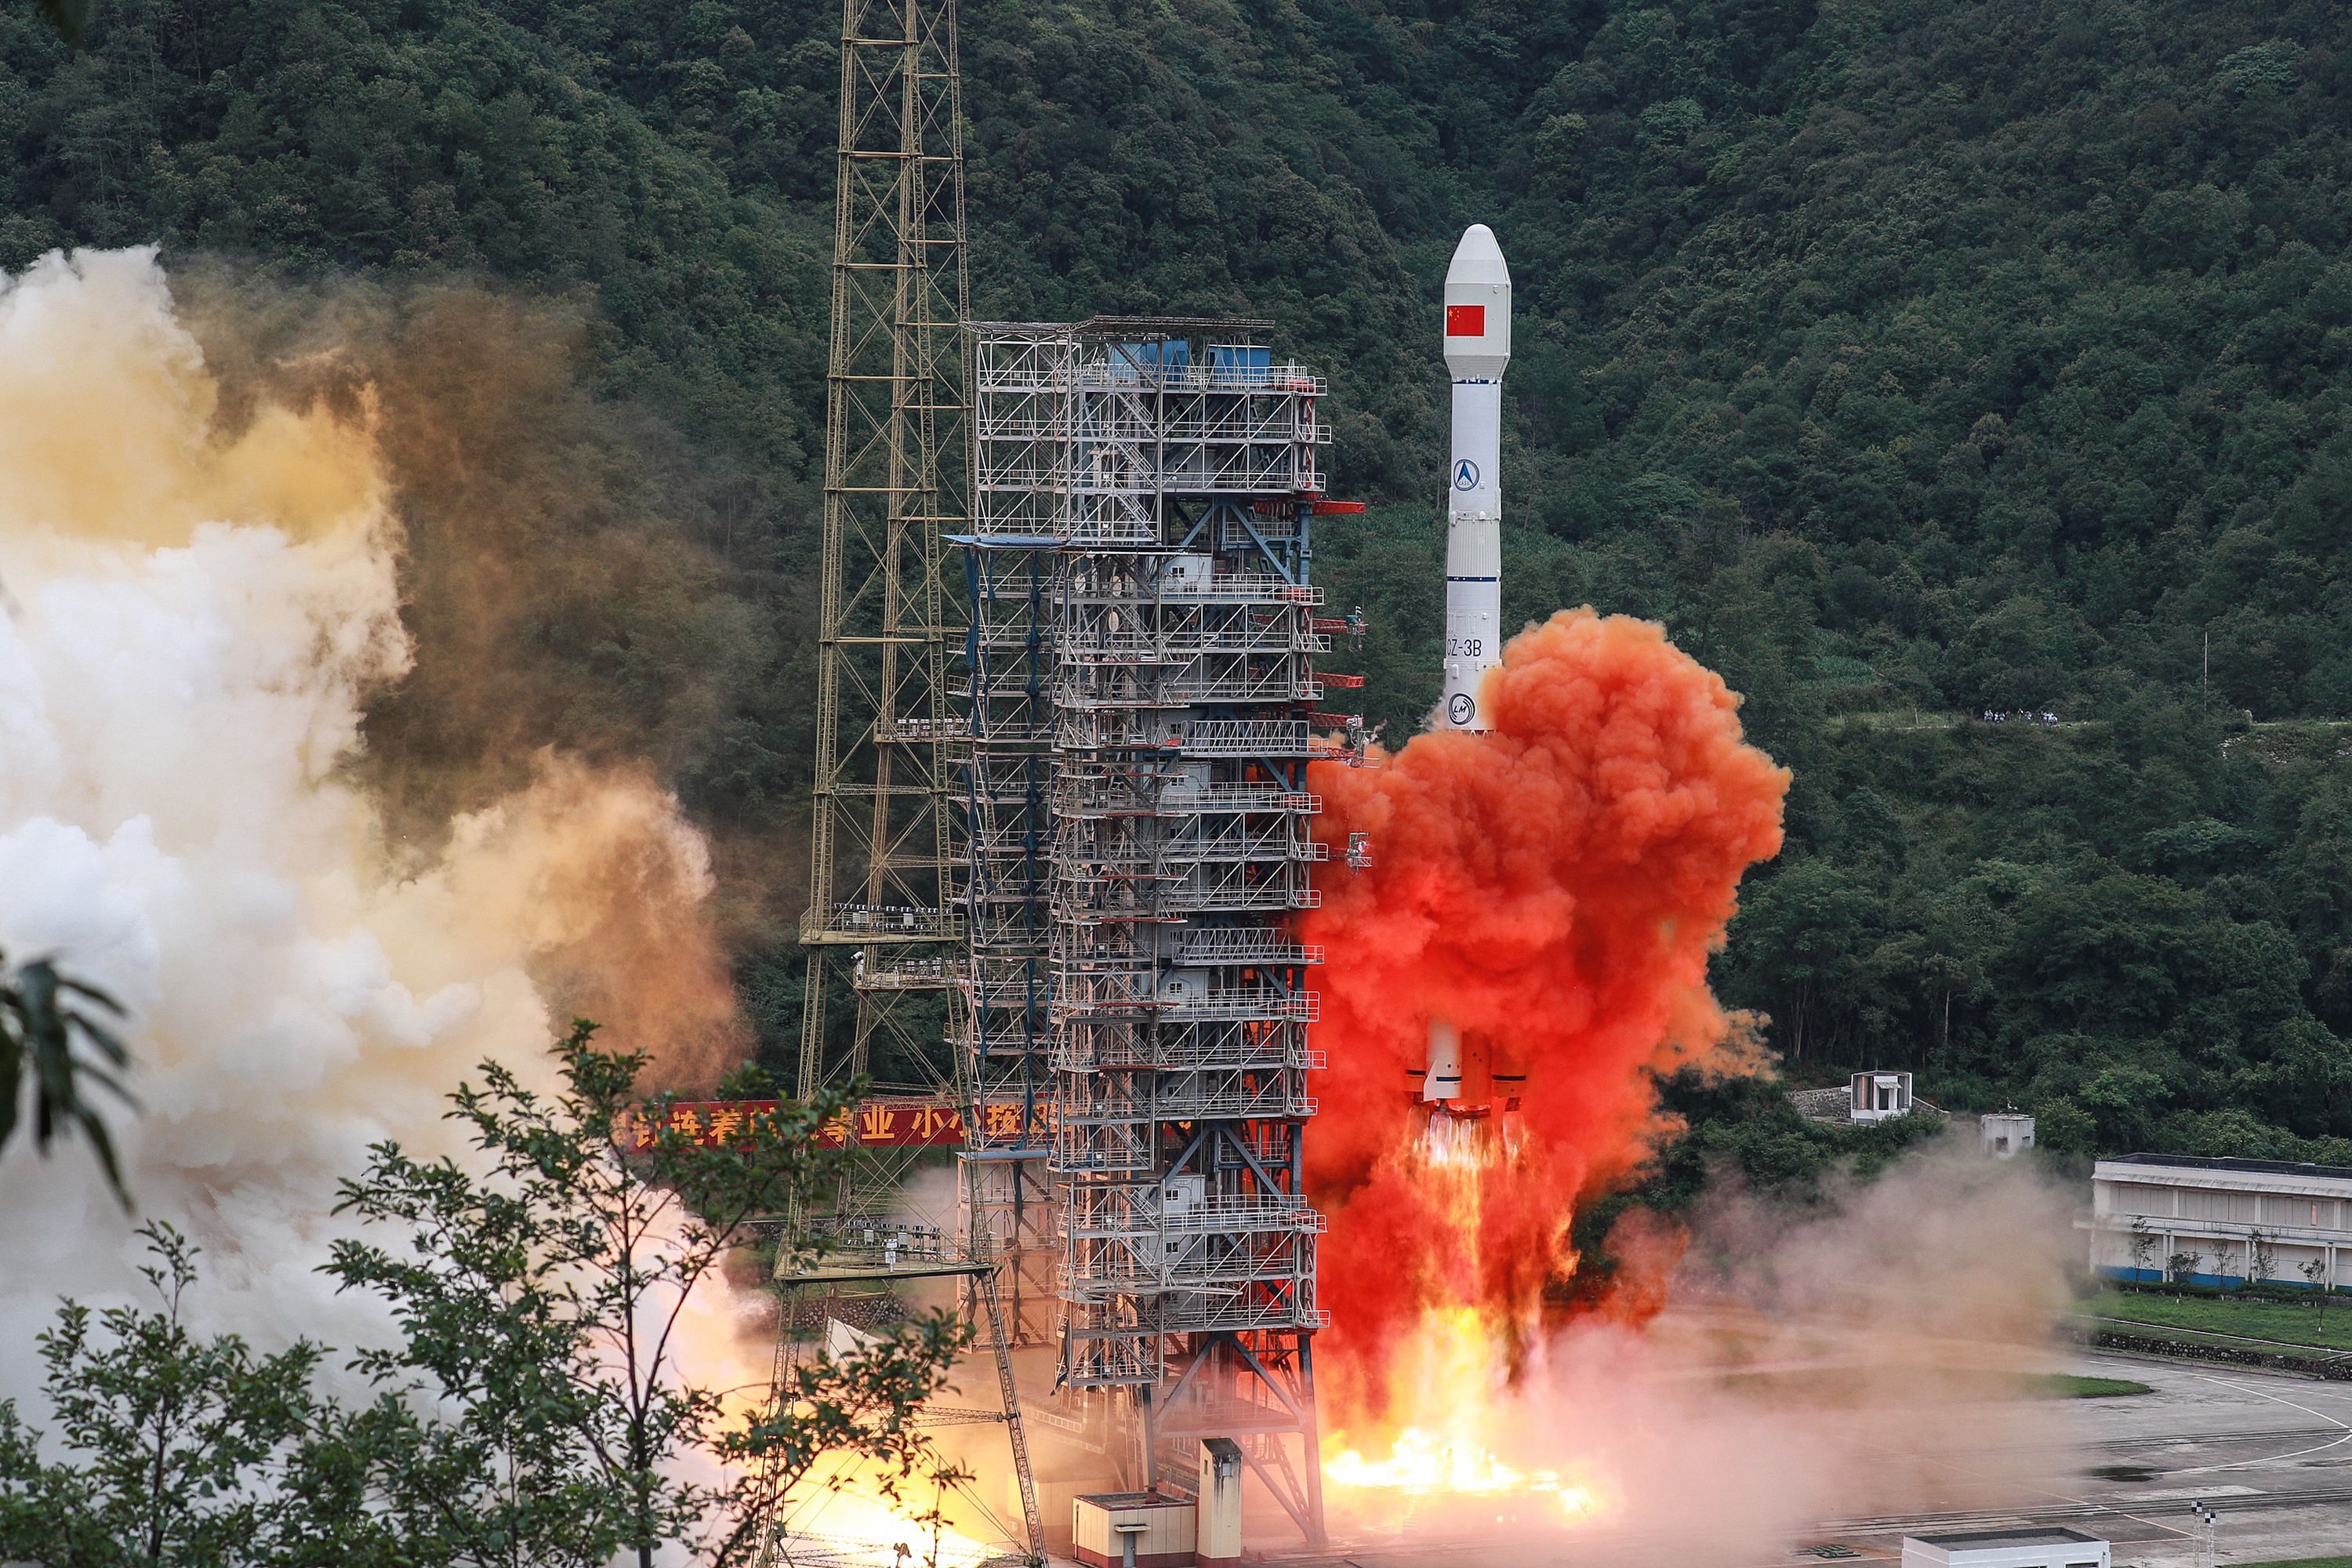 A Long March 3B rocket carrying the Beidou-3GEO3 satellite lifts off from the Xichang Satellite Launch Center in Xichang in China's southwestern Sichuan province on June 23, 2020. - China on June 23 launched the final satellite in its homegrown geolocation system designed to rival the US GPS network, marking a major step in its race for market share in the lucrative sector. (Photo by AFP)